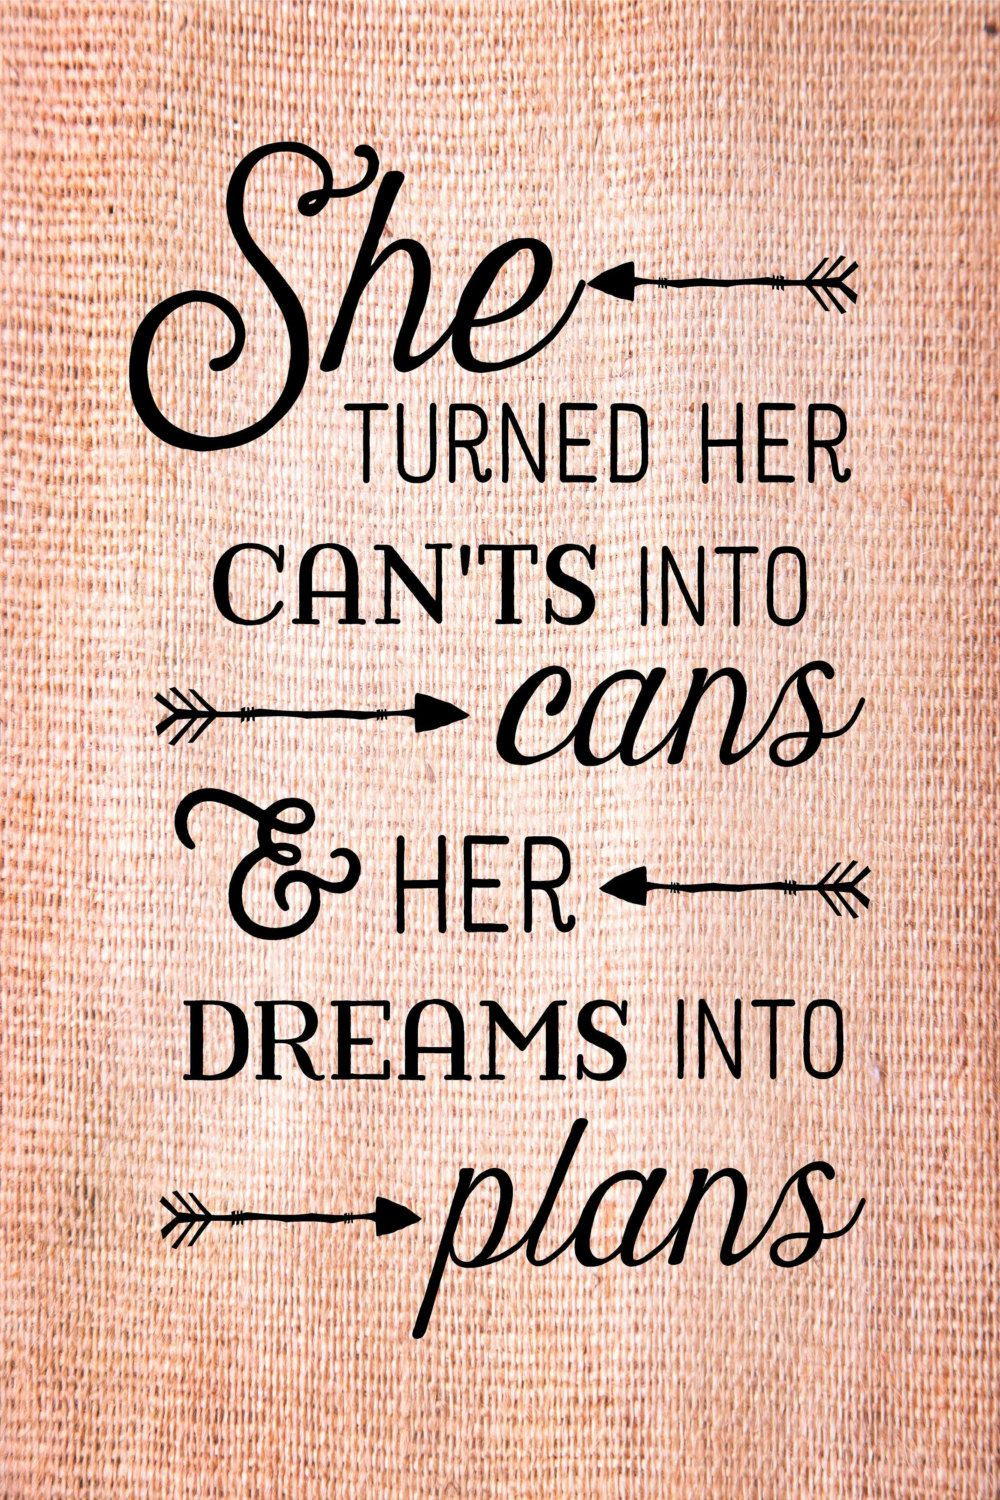 Quotes For Graduation
 Graduation Gift She turned her can ts into cans dreams